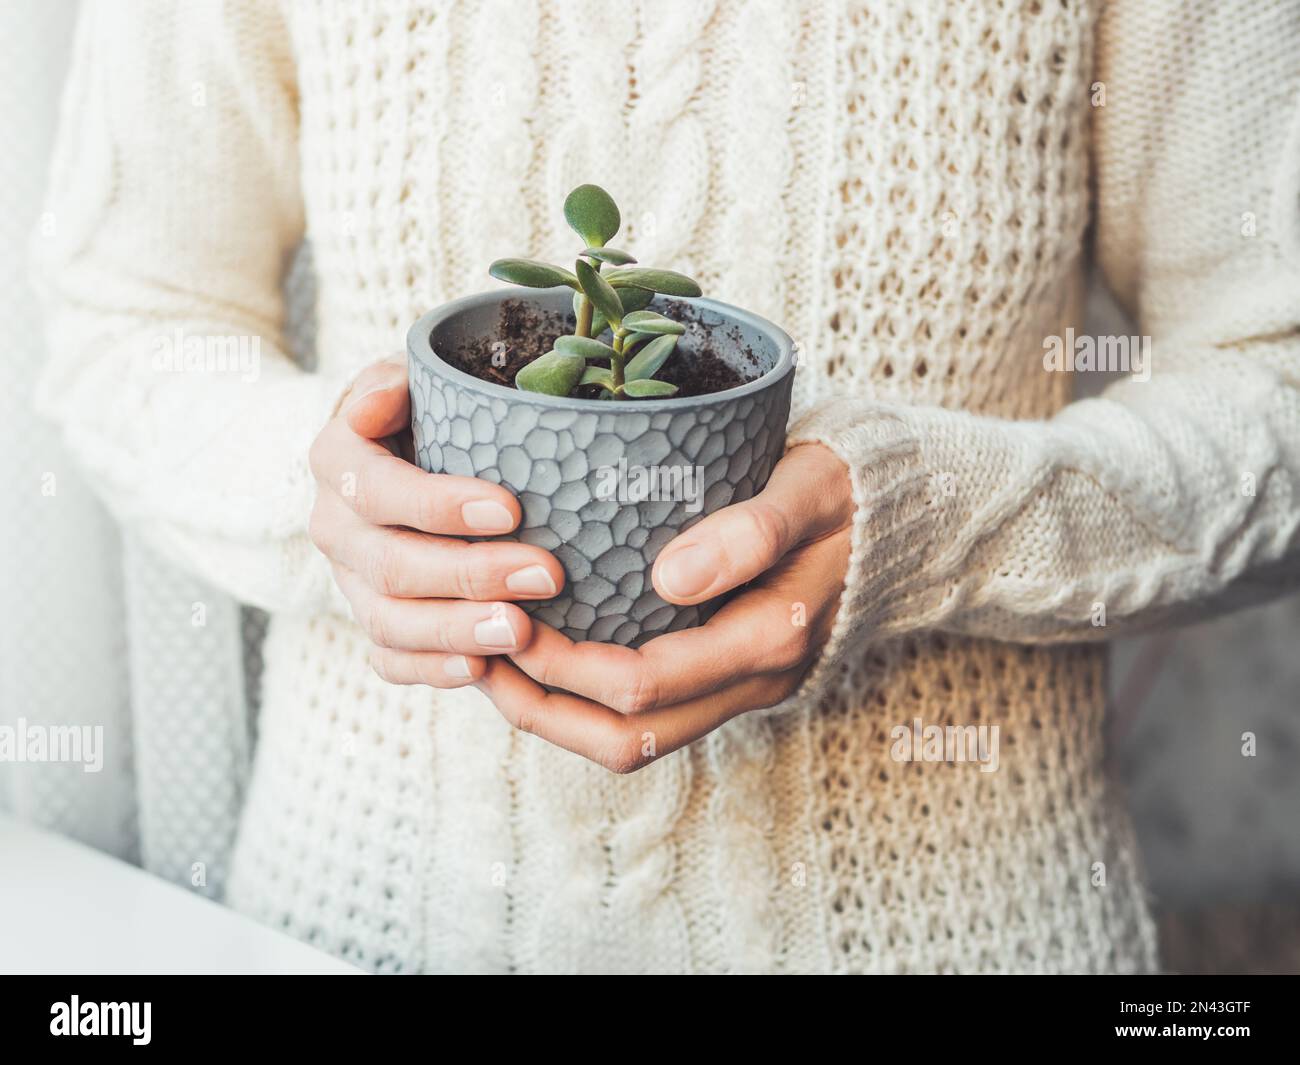 Woman in cable-knit sweater holding Crassula succulent. Indoors plant in grey flower pot. Peaceful botanical hobby. Gardening at home. Stock Photo